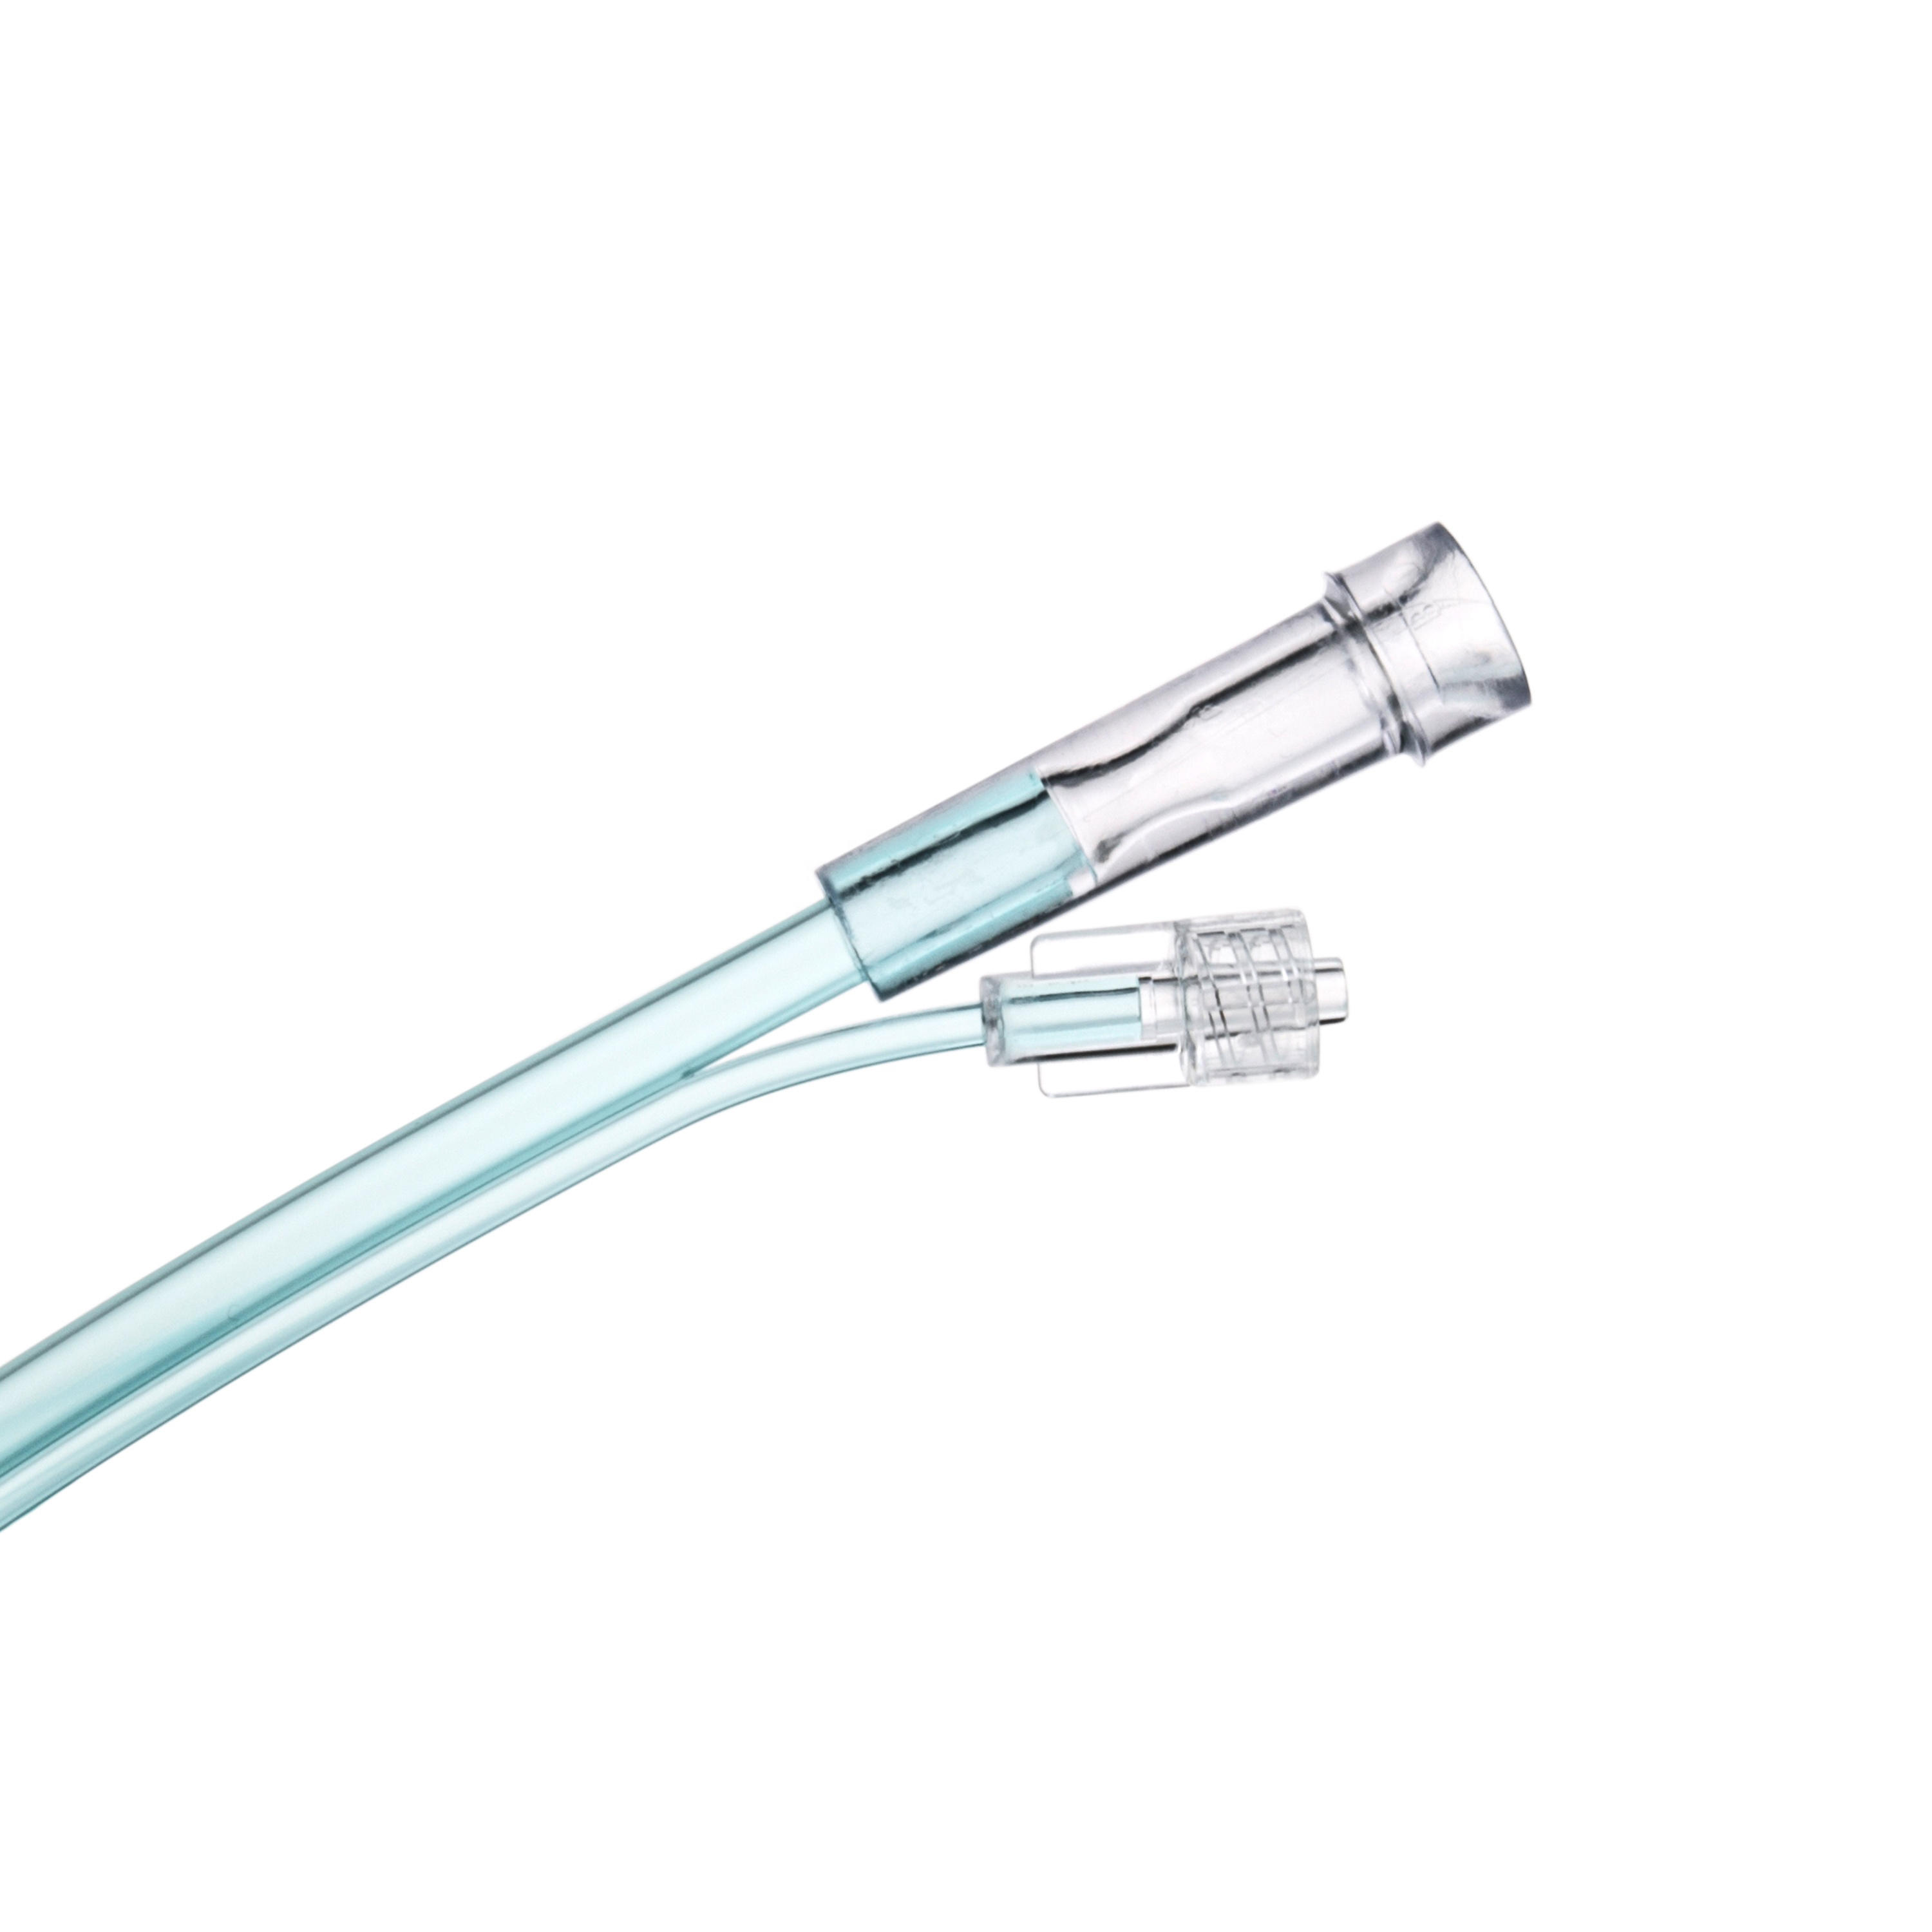 How to Properly Maintain a Disposable Nasal Cannula